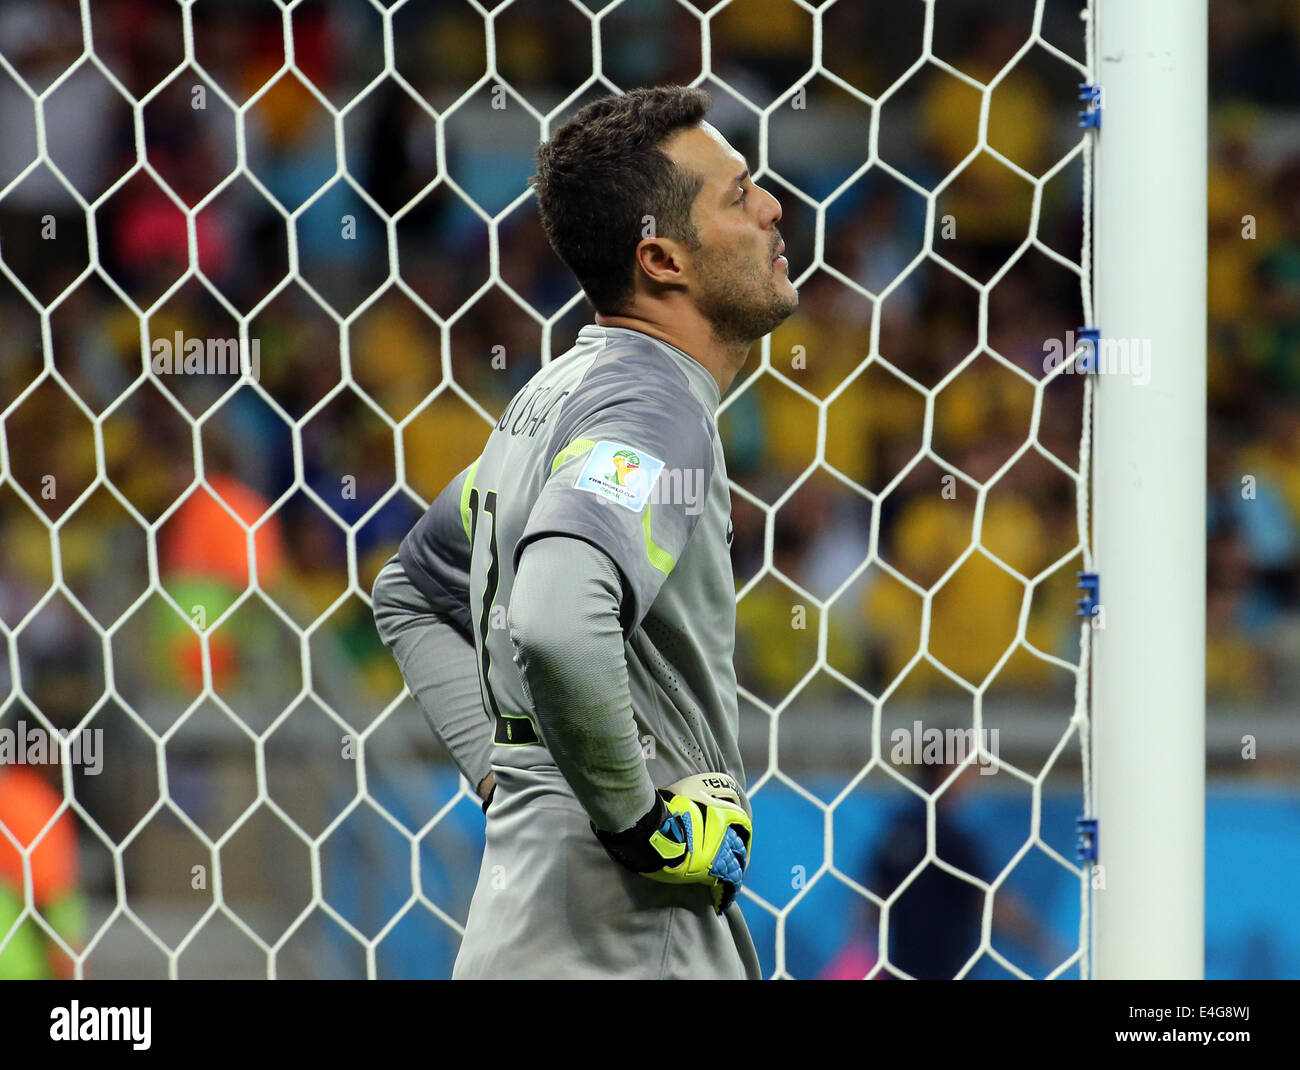 08.07.2014. Estadio Mineirao, Belo Horizonte, Brazil. FIFA World Cup 2014 semi-final soccer match between Brazil and Germany at Estadio Mineirao. Julio Cesar disappointed after seventh goal Stock Photo